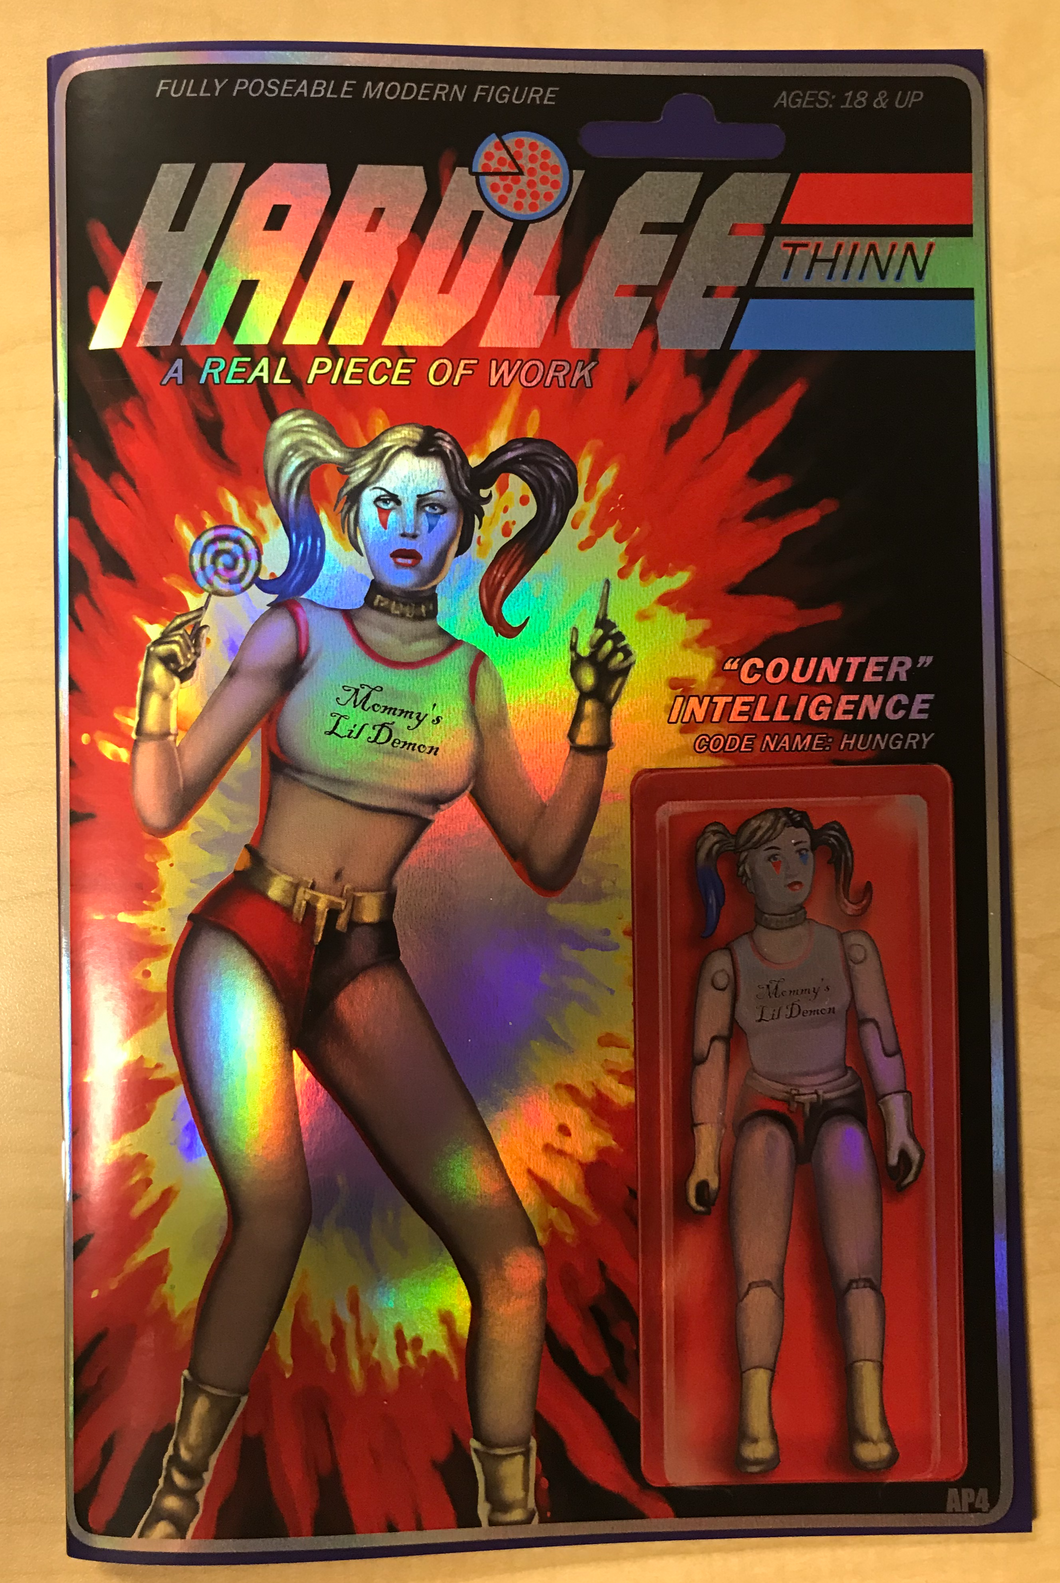 Hardlee Thinn #1 G I Joe Action Figure Homage CHROME Variant Cover by Marat Mychaels Artist Proof Only 10 Copies Made!!!